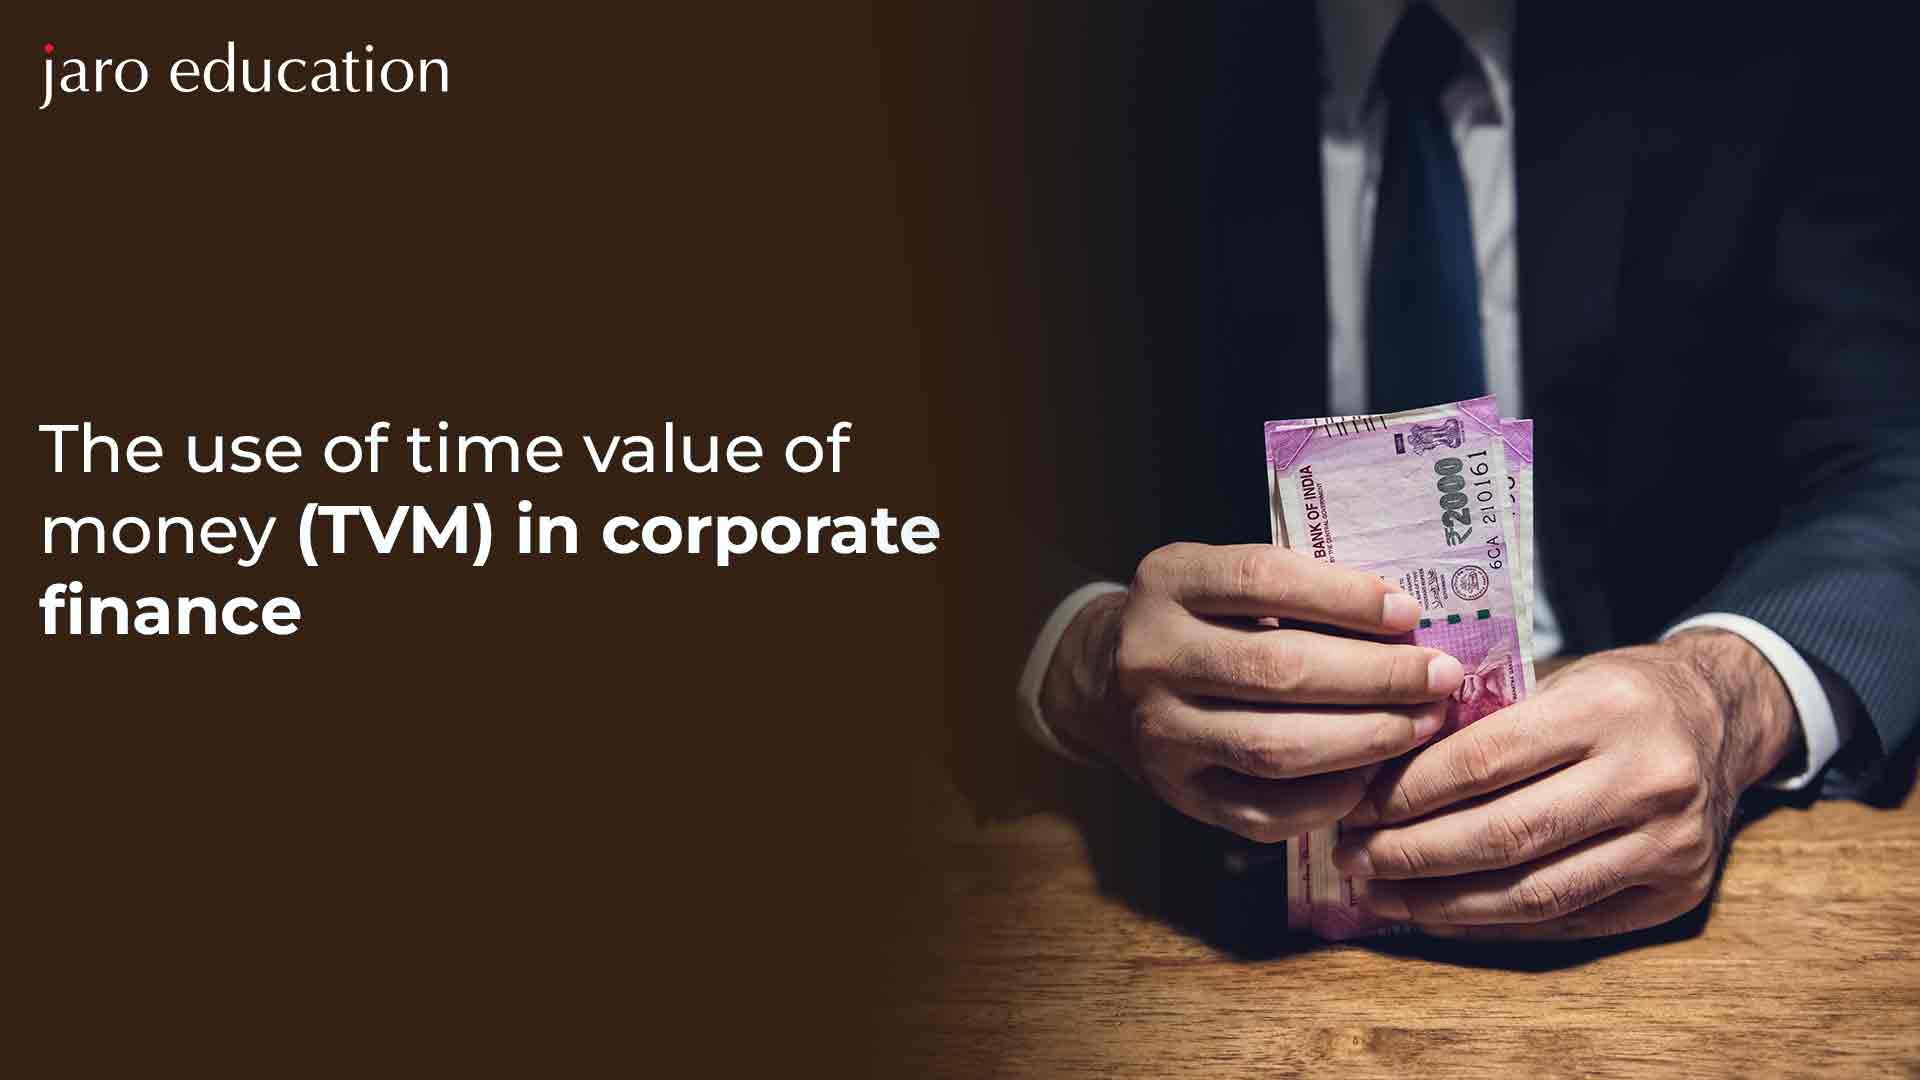 The use of time value of money (TVM) in corporate finance